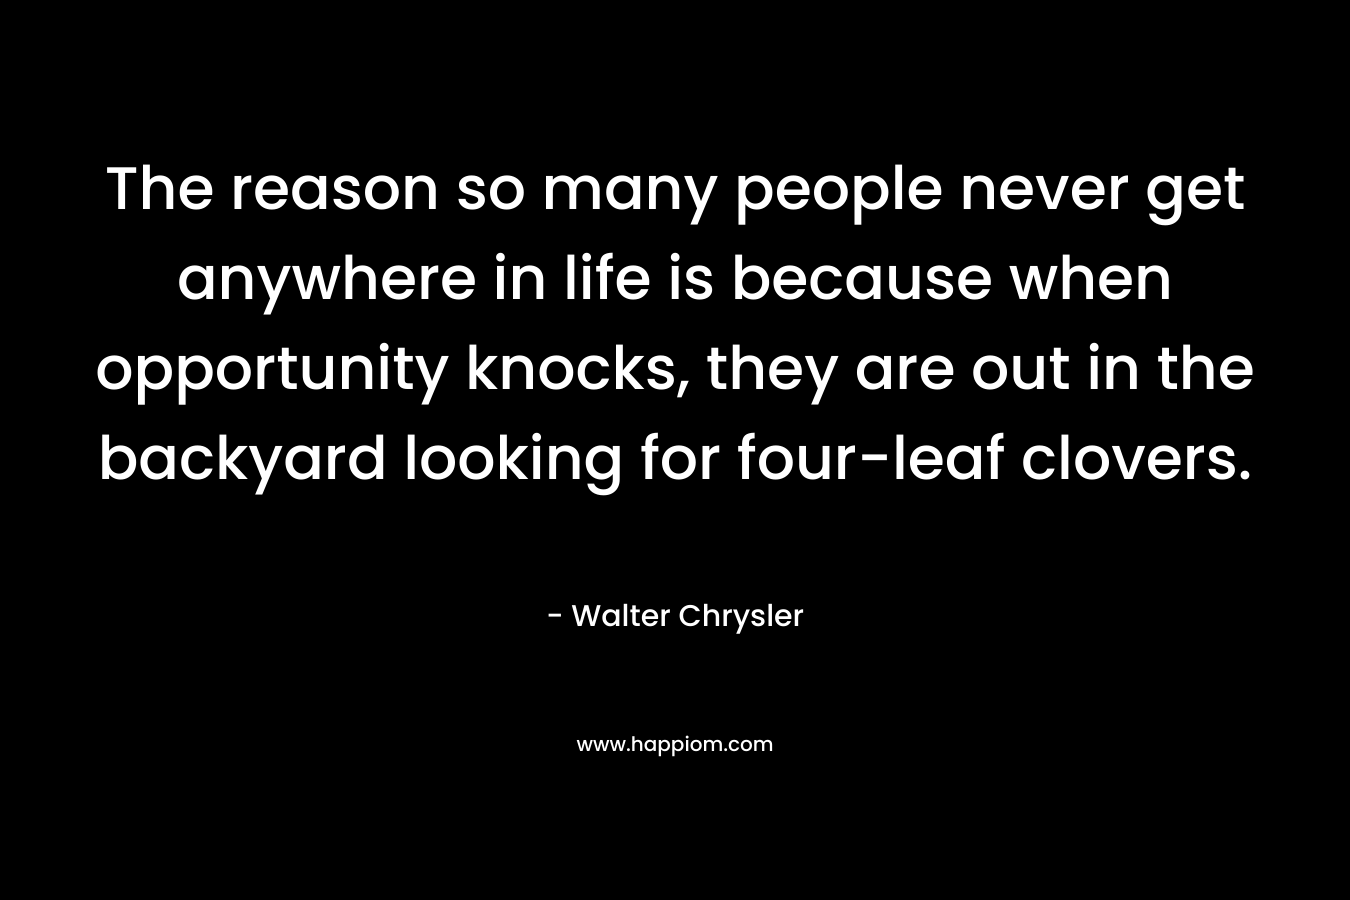 The reason so many people never get anywhere in life is because when opportunity knocks, they are out in the backyard looking for four-leaf clovers. – Walter Chrysler